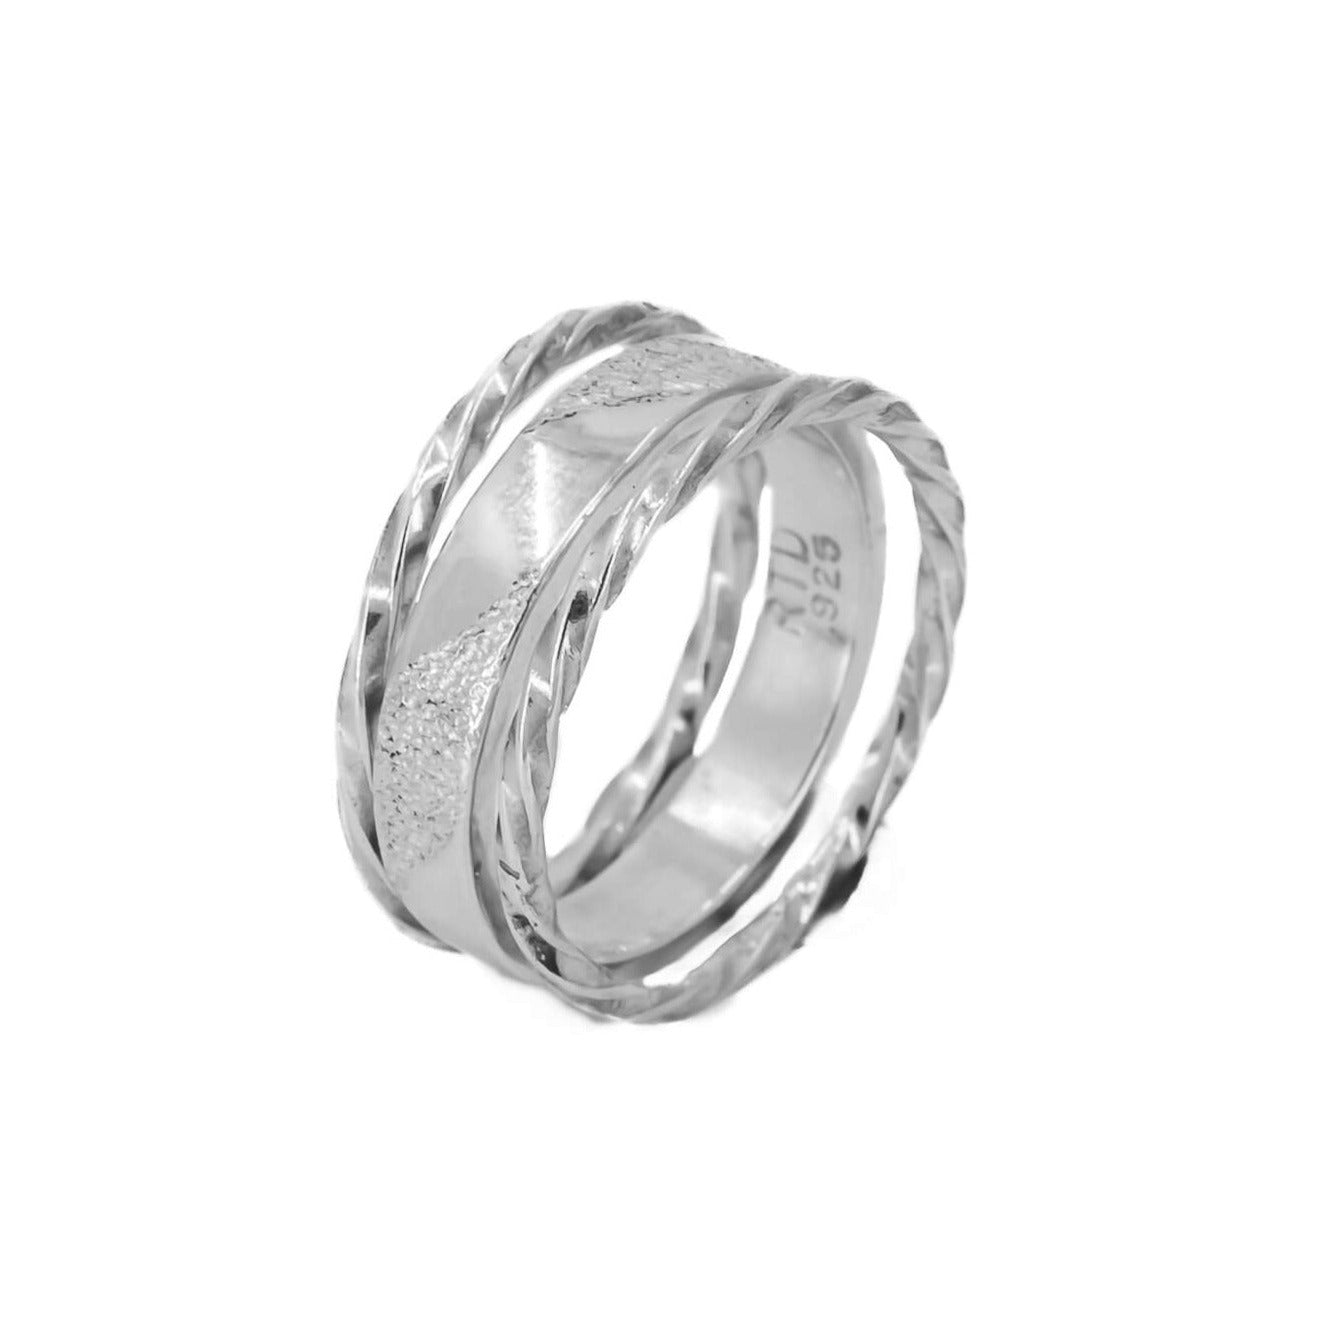 Set of 3 Sterling Silver Stackable Rings - Rope and Leap Rings